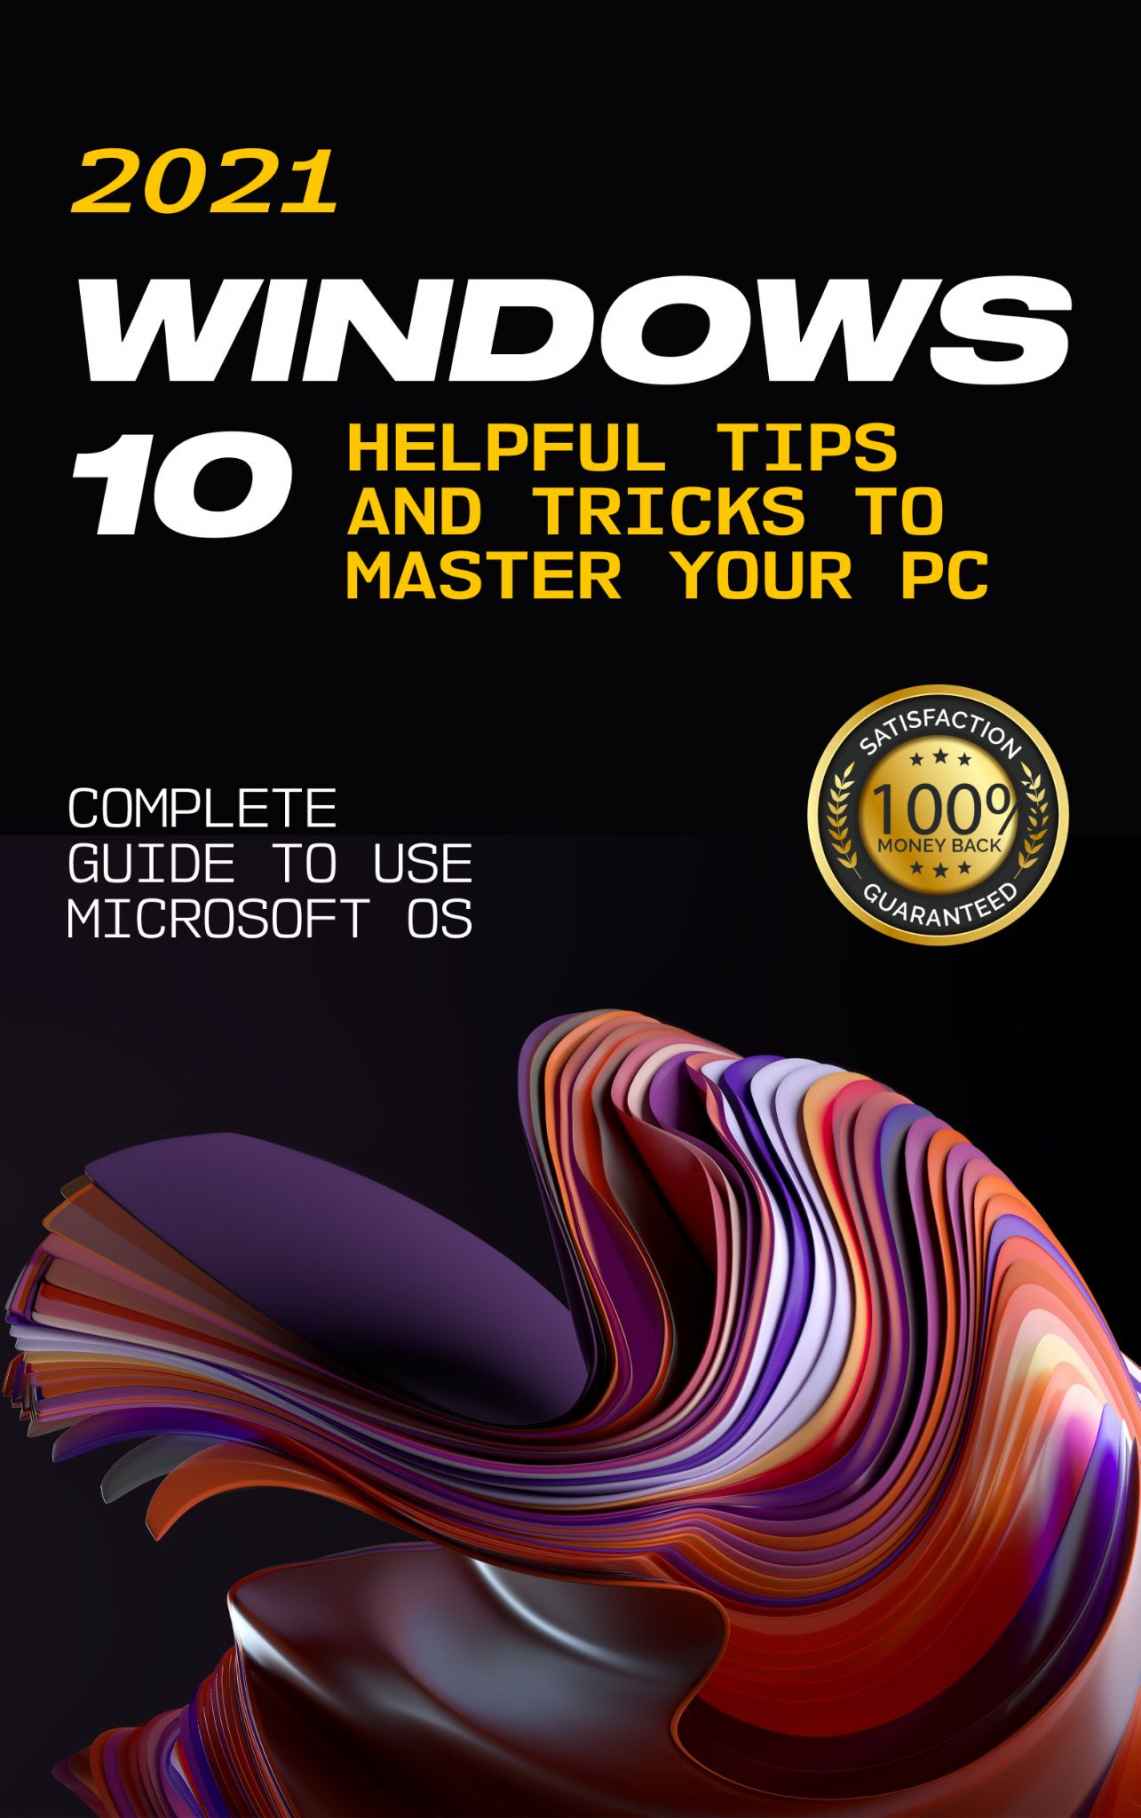 Windows 10 2021 Complete Guide to Use Microsoft OS 10 Helpful Tips and Tricks - photo 1